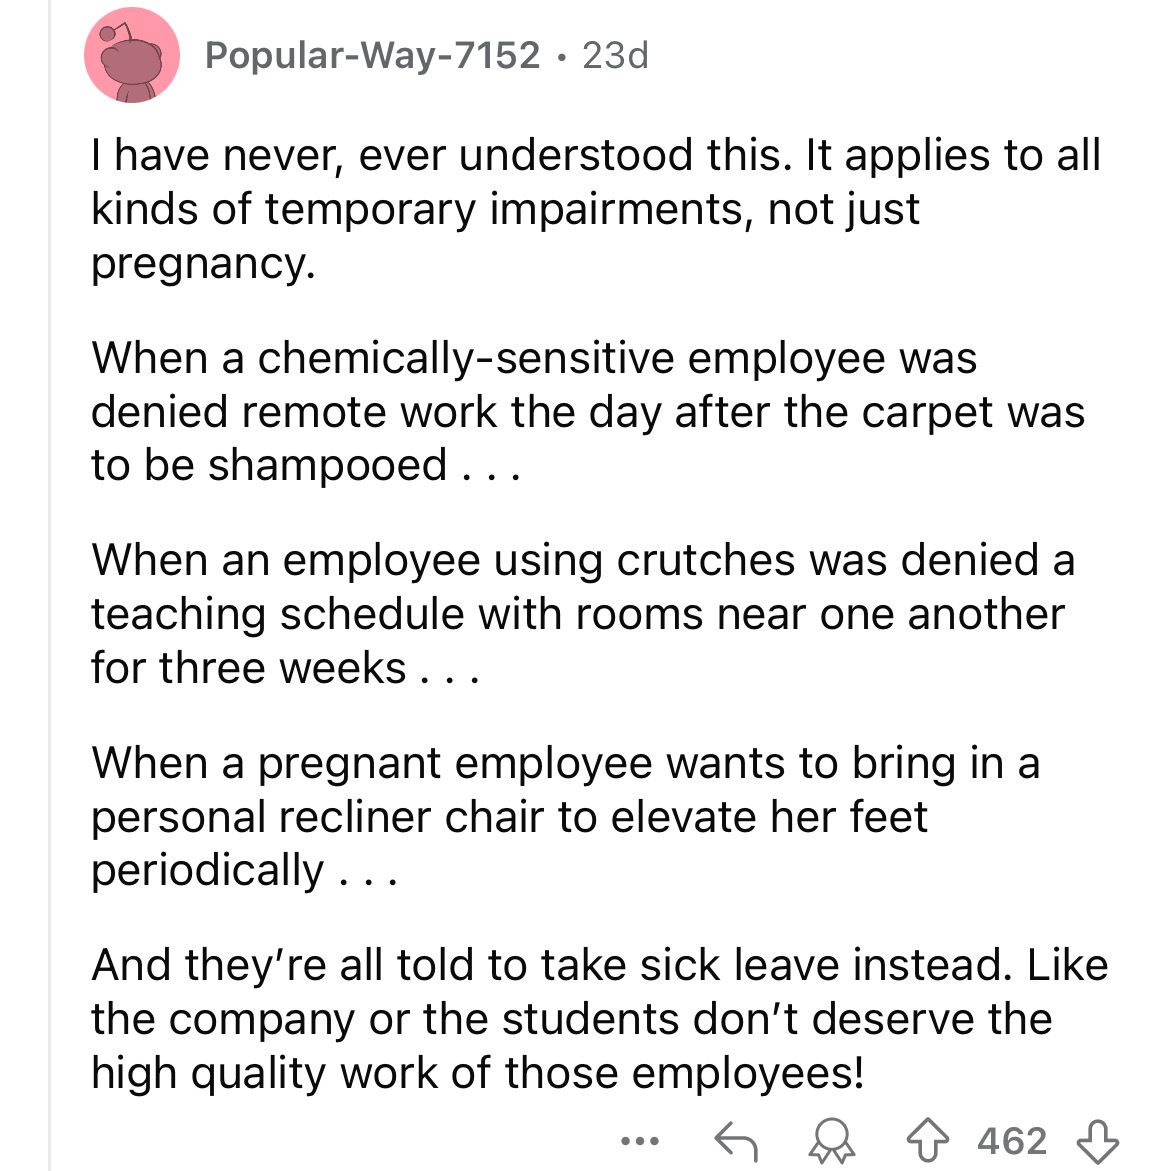 document - PopularWay7152.23d I have never, ever understood this. It applies to all kinds of temporary impairments, not just pregnancy. When a chemicallysensitive employee was denied remote work the day after the carpet was to be shampooed ... When an emp